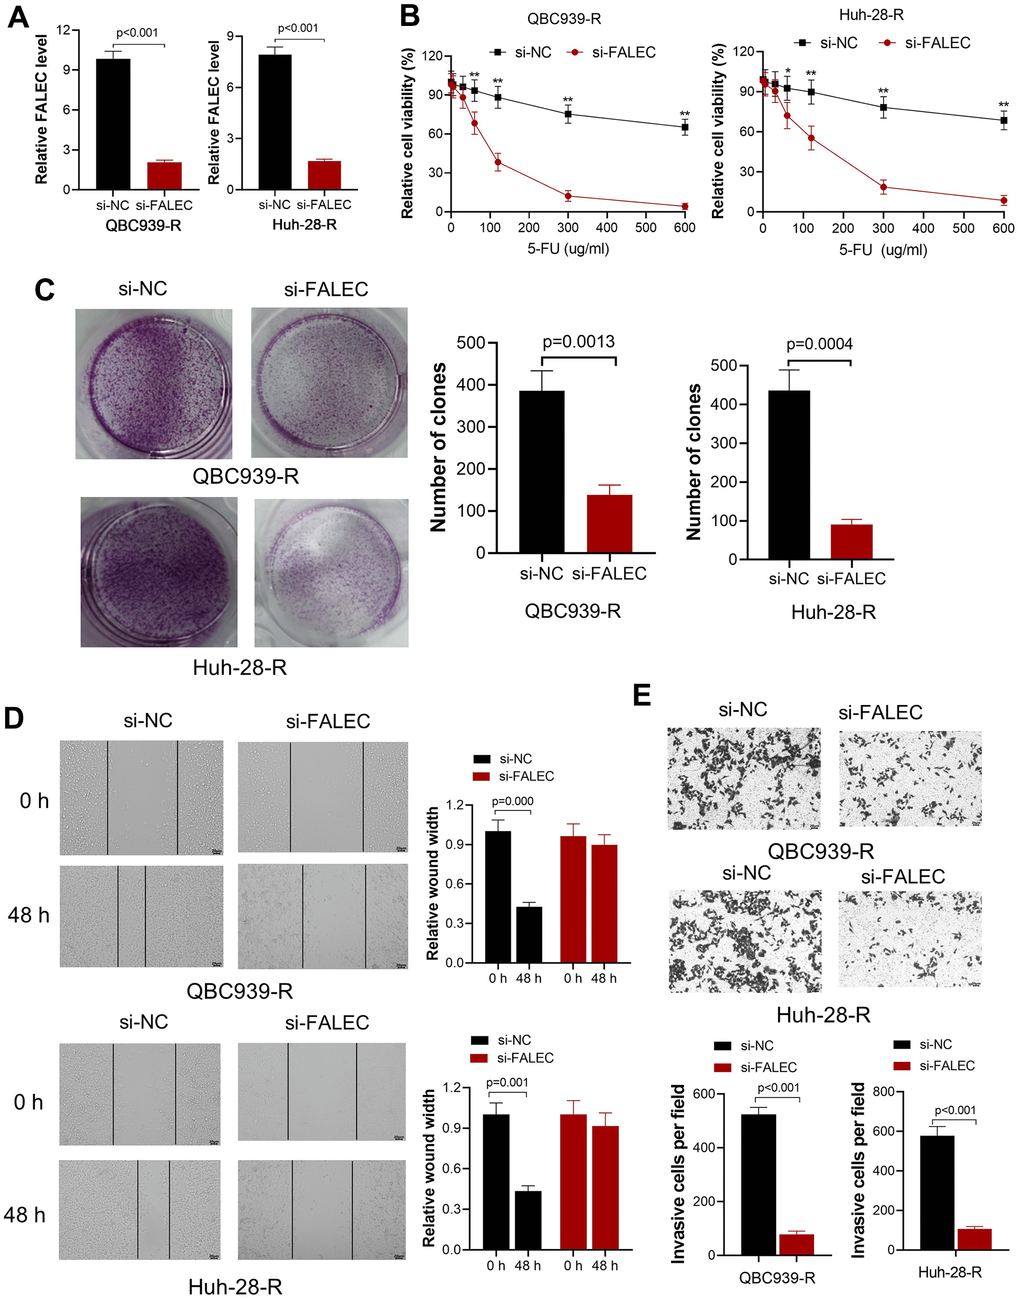 Knockdown FALEC increase the sensitivity of 5-FU resistant CCA cells. (A) FALEC level was significantly reduced in 5-FU resistant cell lines (QBC939-R and Huh-28-R) after transfected by si-FALEC. (B) Cell viability of QBC939-R and Huh-28-R decreased after transfected by si-FALEC; *, p**, pC) The proliferation ability of cells was measured by clone formation assay. Knocking down FALEC decreases the clone formation of QBC939-R and Huh-28-R significantly; (D) The migration ability of QBC939-R and Huh-28-R cells were measured by scratch method. Knocking down FALEC decreased the migration ability of both cell lines; (E) The invasion ability of QBC939-R and Huh-28-R cells decreased after knocking down FALEC.